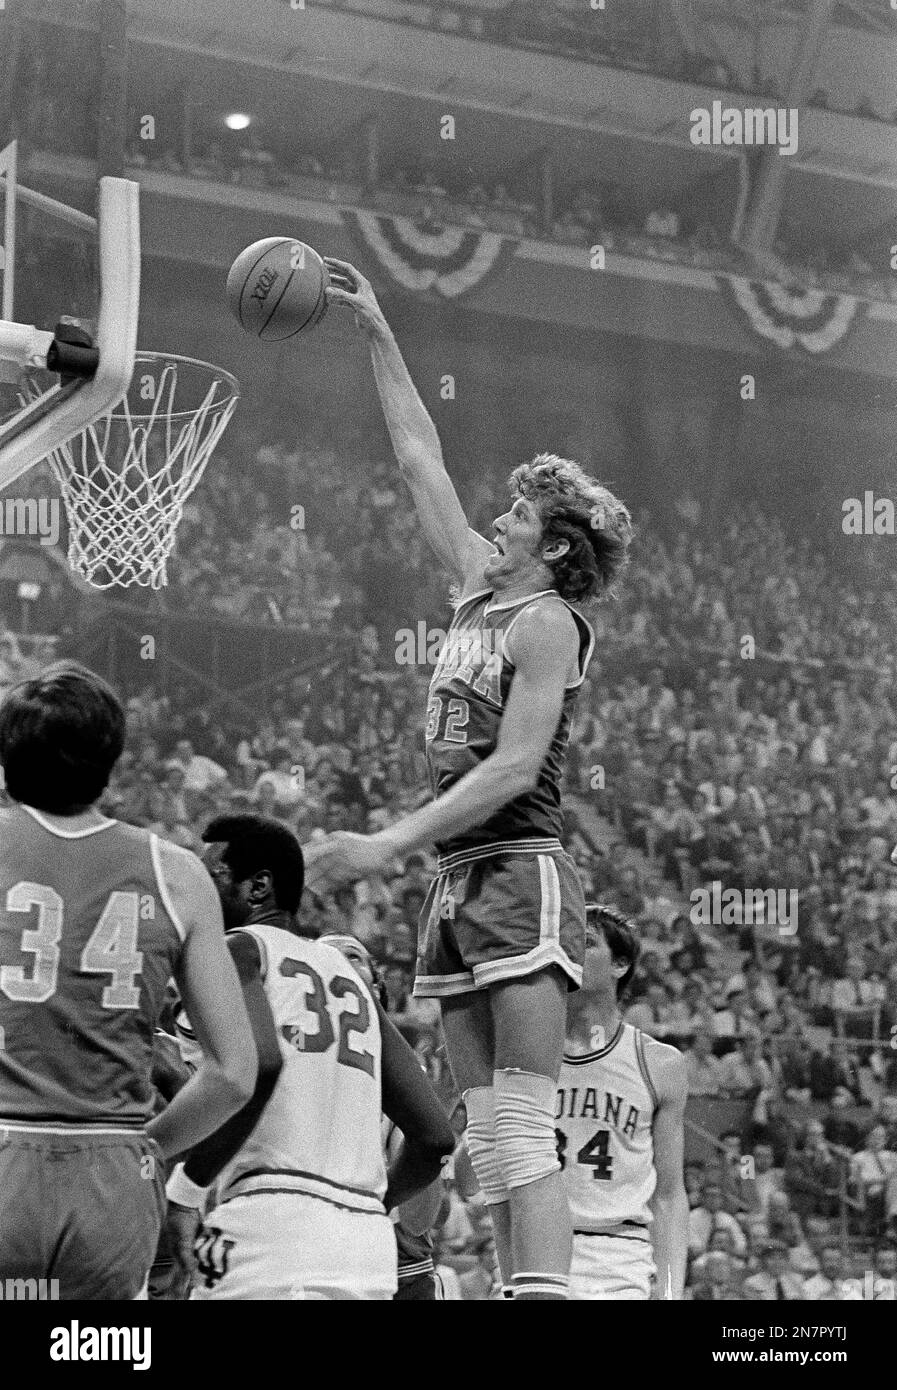 FILE - In this March 26, 1973, file photo, UCLA's Bill Walton leaps high to dunk against Indiana during a national semifinal game at the Final Four of the NCAA college basketball tournament at St. Louis, Mo. In left foreground is teammate Dave Meyers, left, and Indiana center Steve Downing. UCLA won 70-59. (AP Photo/File) Stock Photo